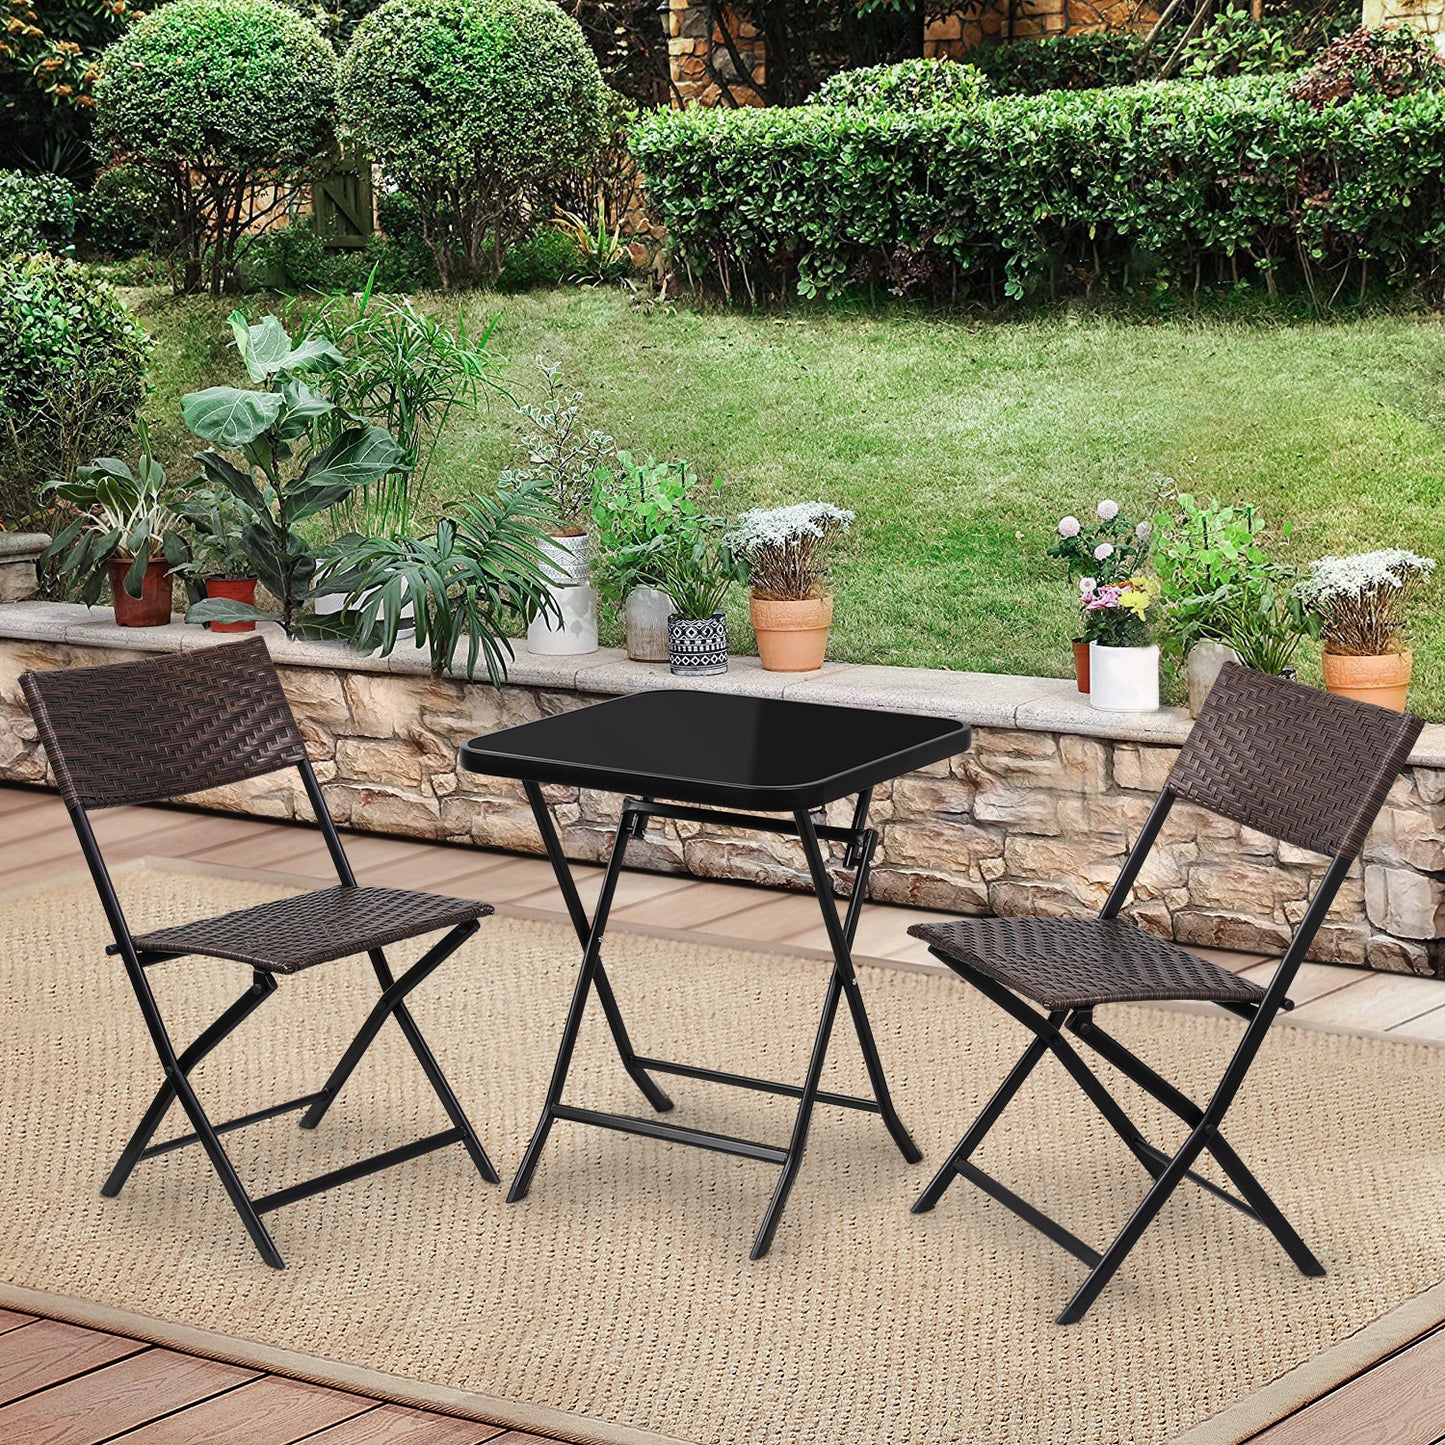 Set of 2 Foldable Patio Rattan Wicker Chair